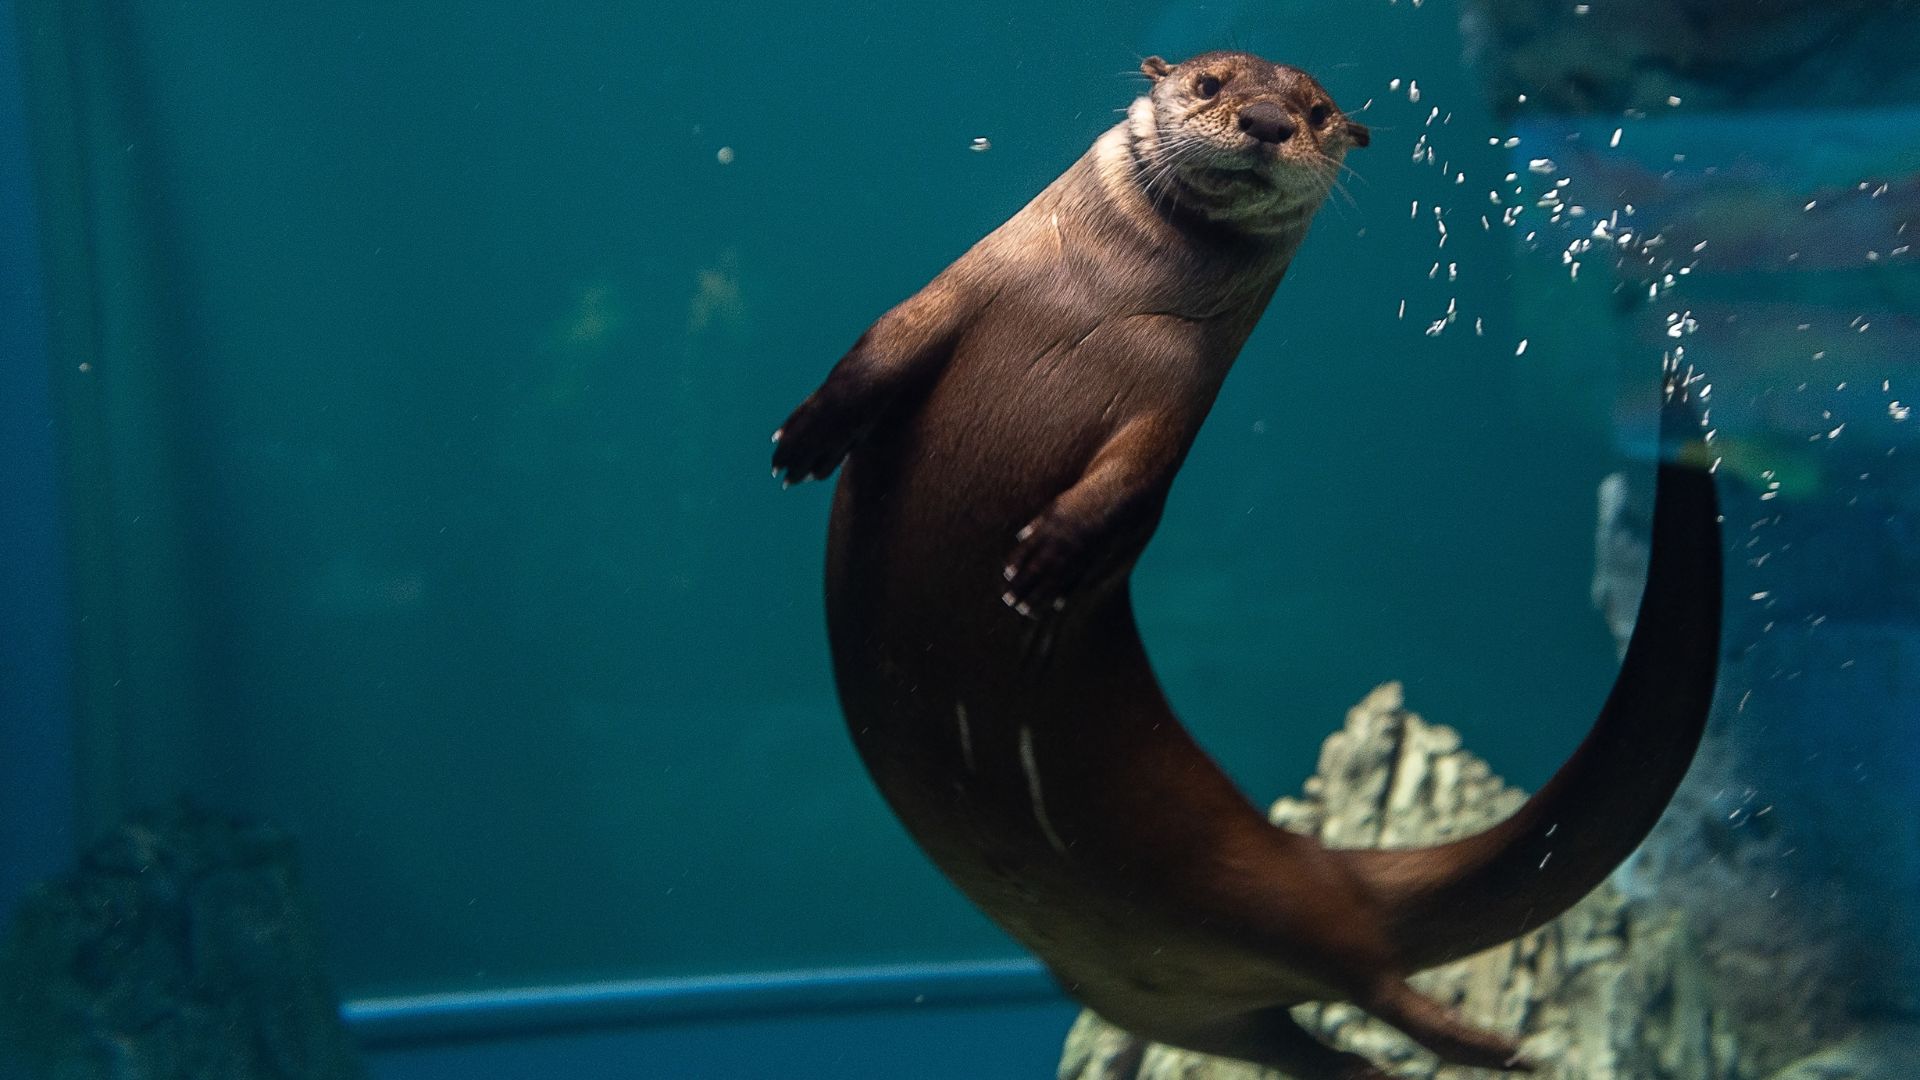 An otter poses at the St. Louis Aquarium, a fantastic kid-friendly attraction.